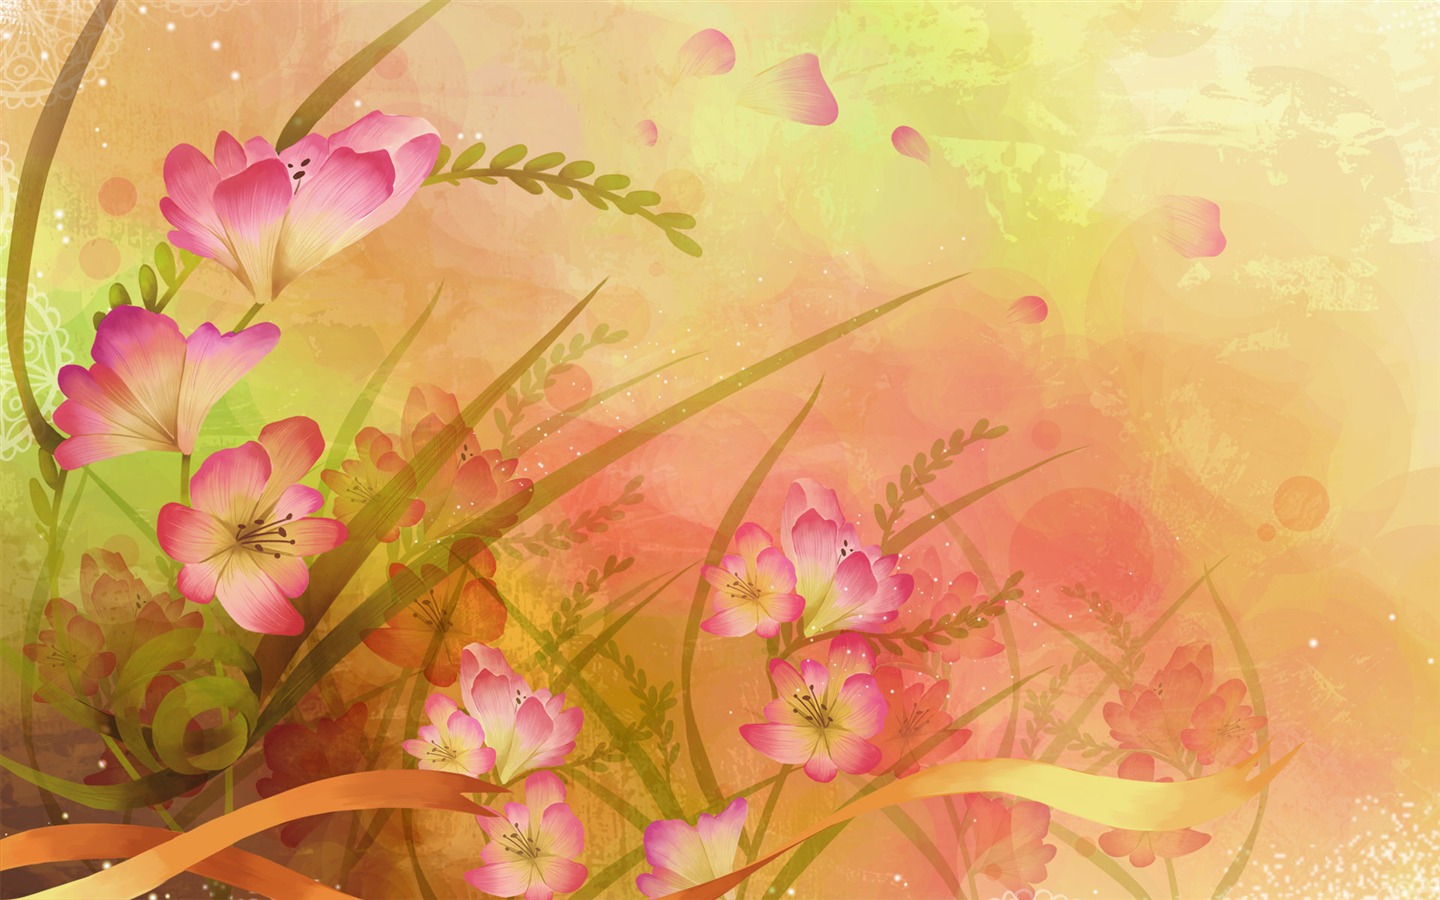 Synthetic Wallpaper Colorful Flower #40 - 1440x900